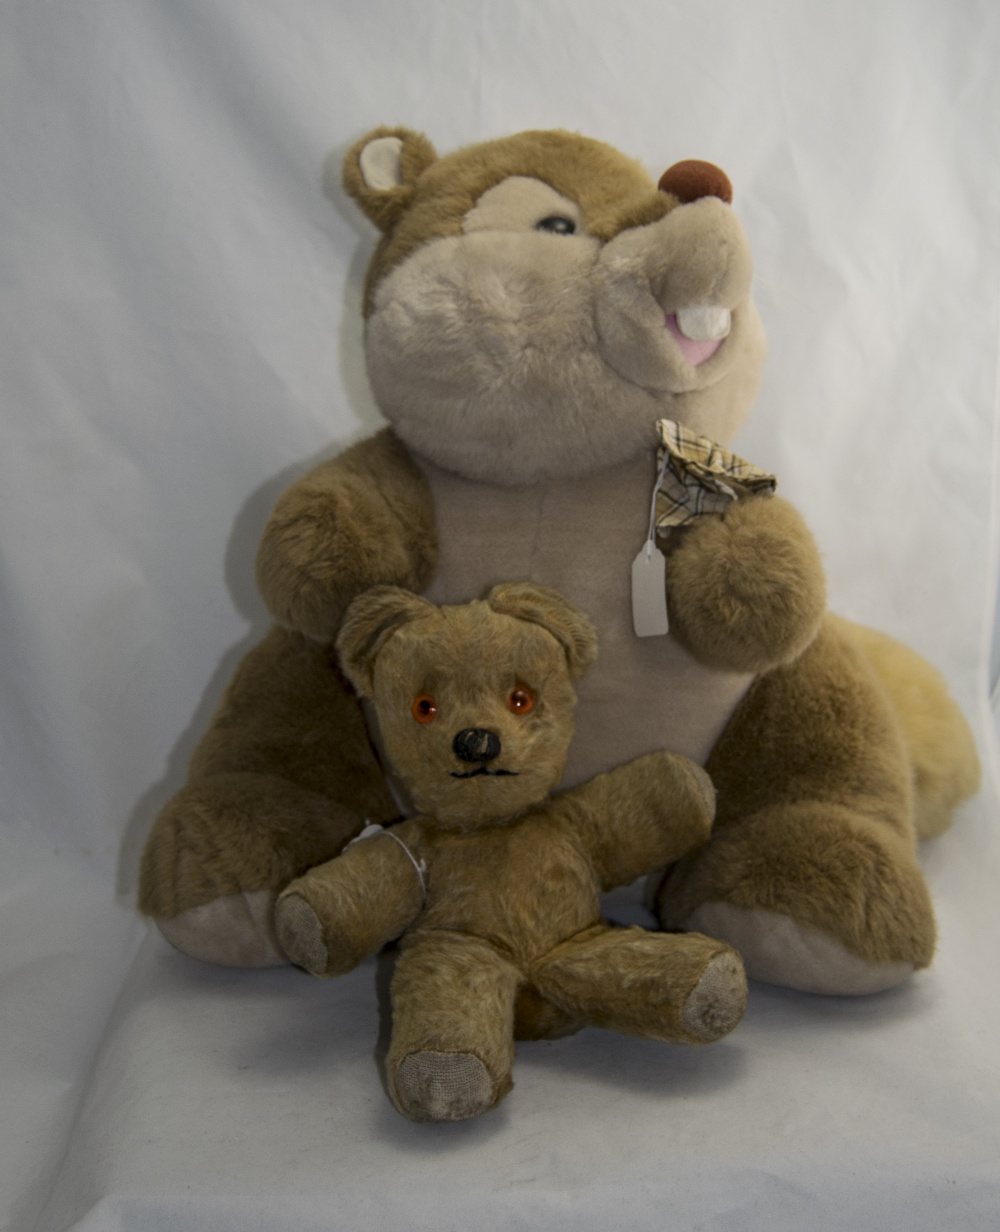 Early/Mid 20thC Teddy Bear Together With A Large Modern Chipmunk Plush Toy